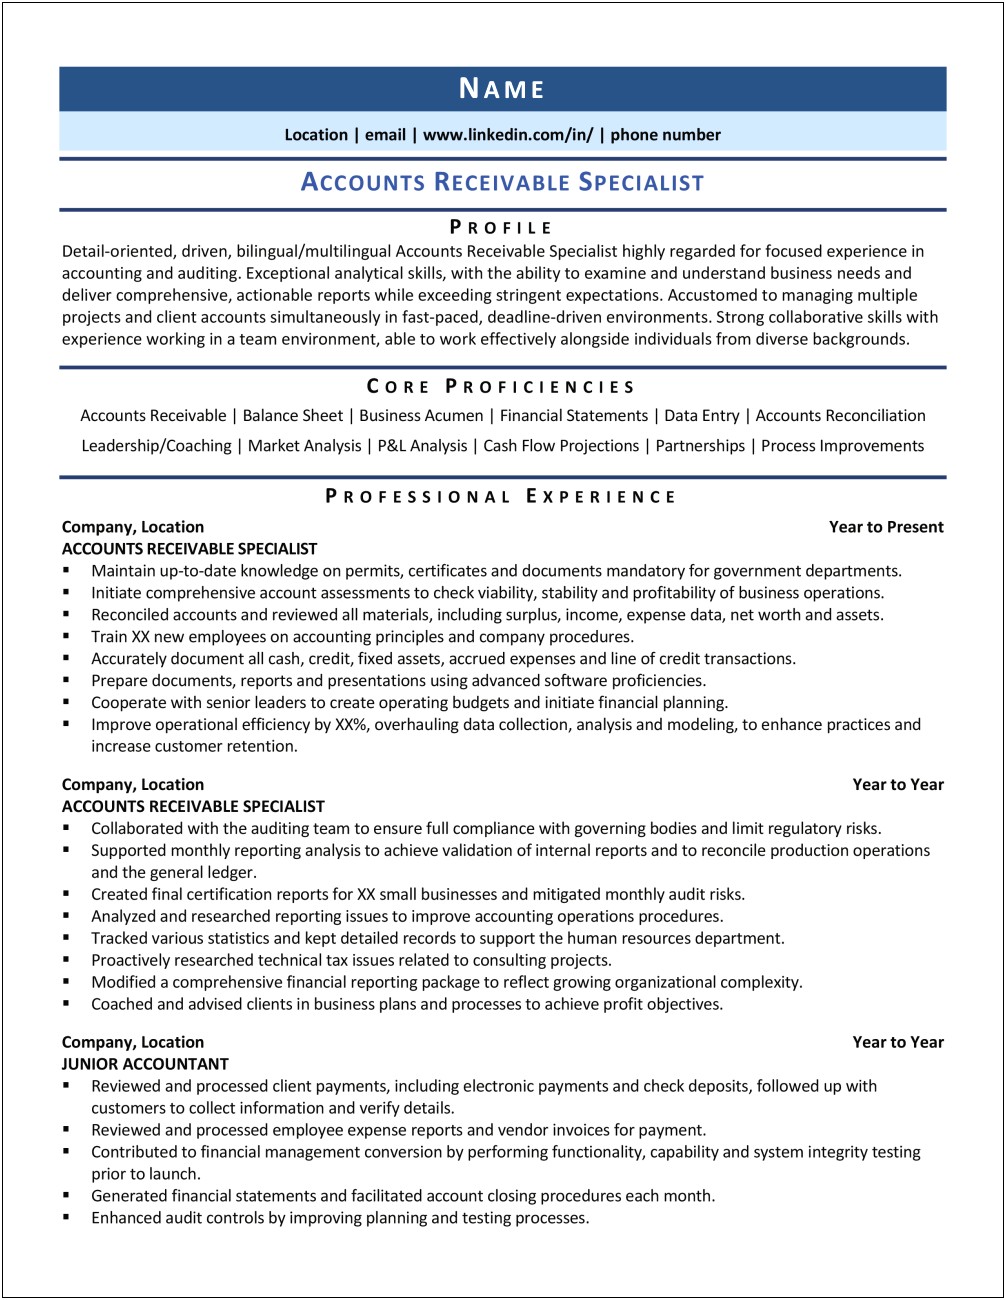 Sample Resume Of Account Receivable